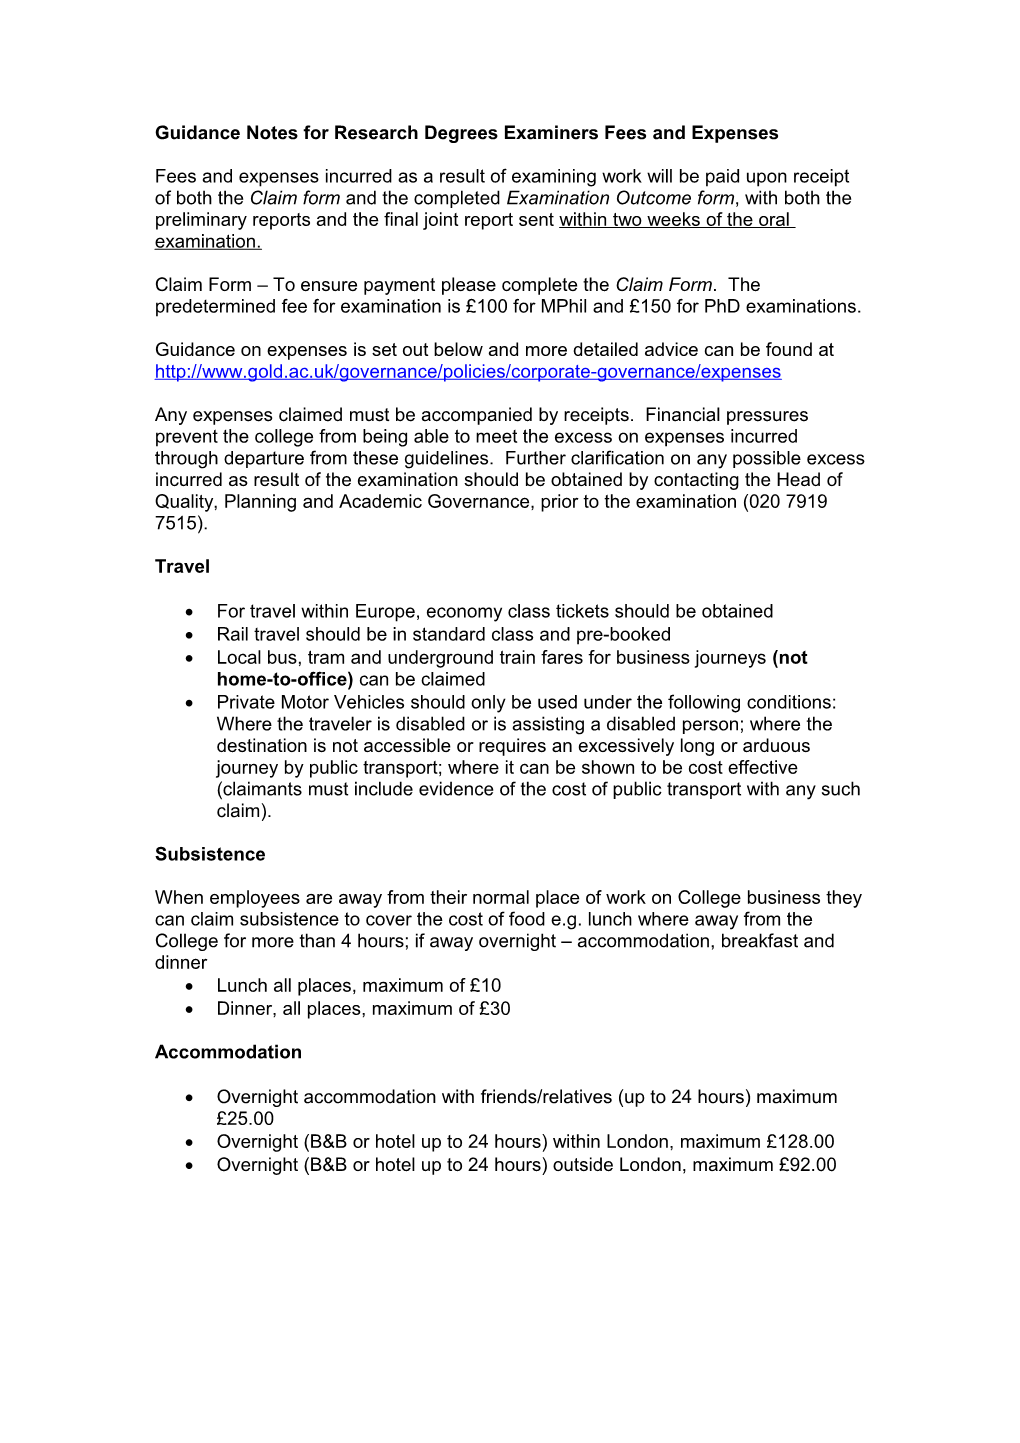 Guidance Notes for Research Degrees Examiners Fees and Expenses